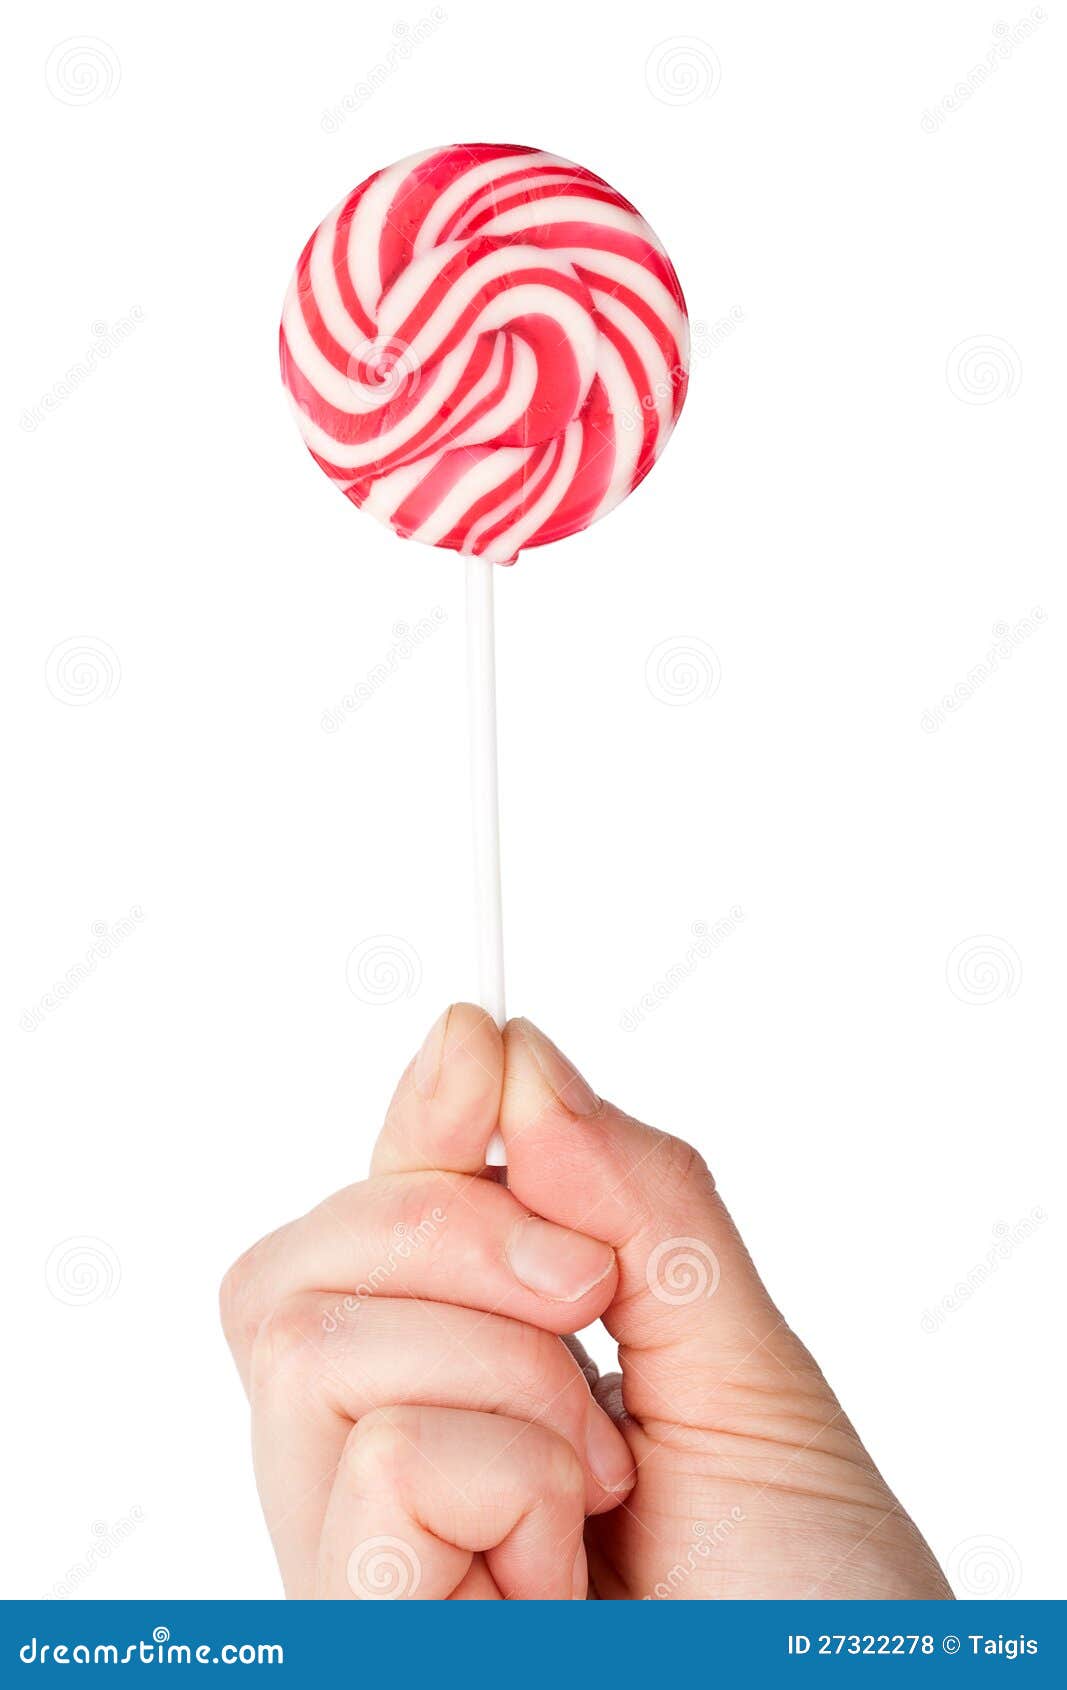 Hand Holding Spiral Lollipop Stock Photo - Image of candy, lollypop ...